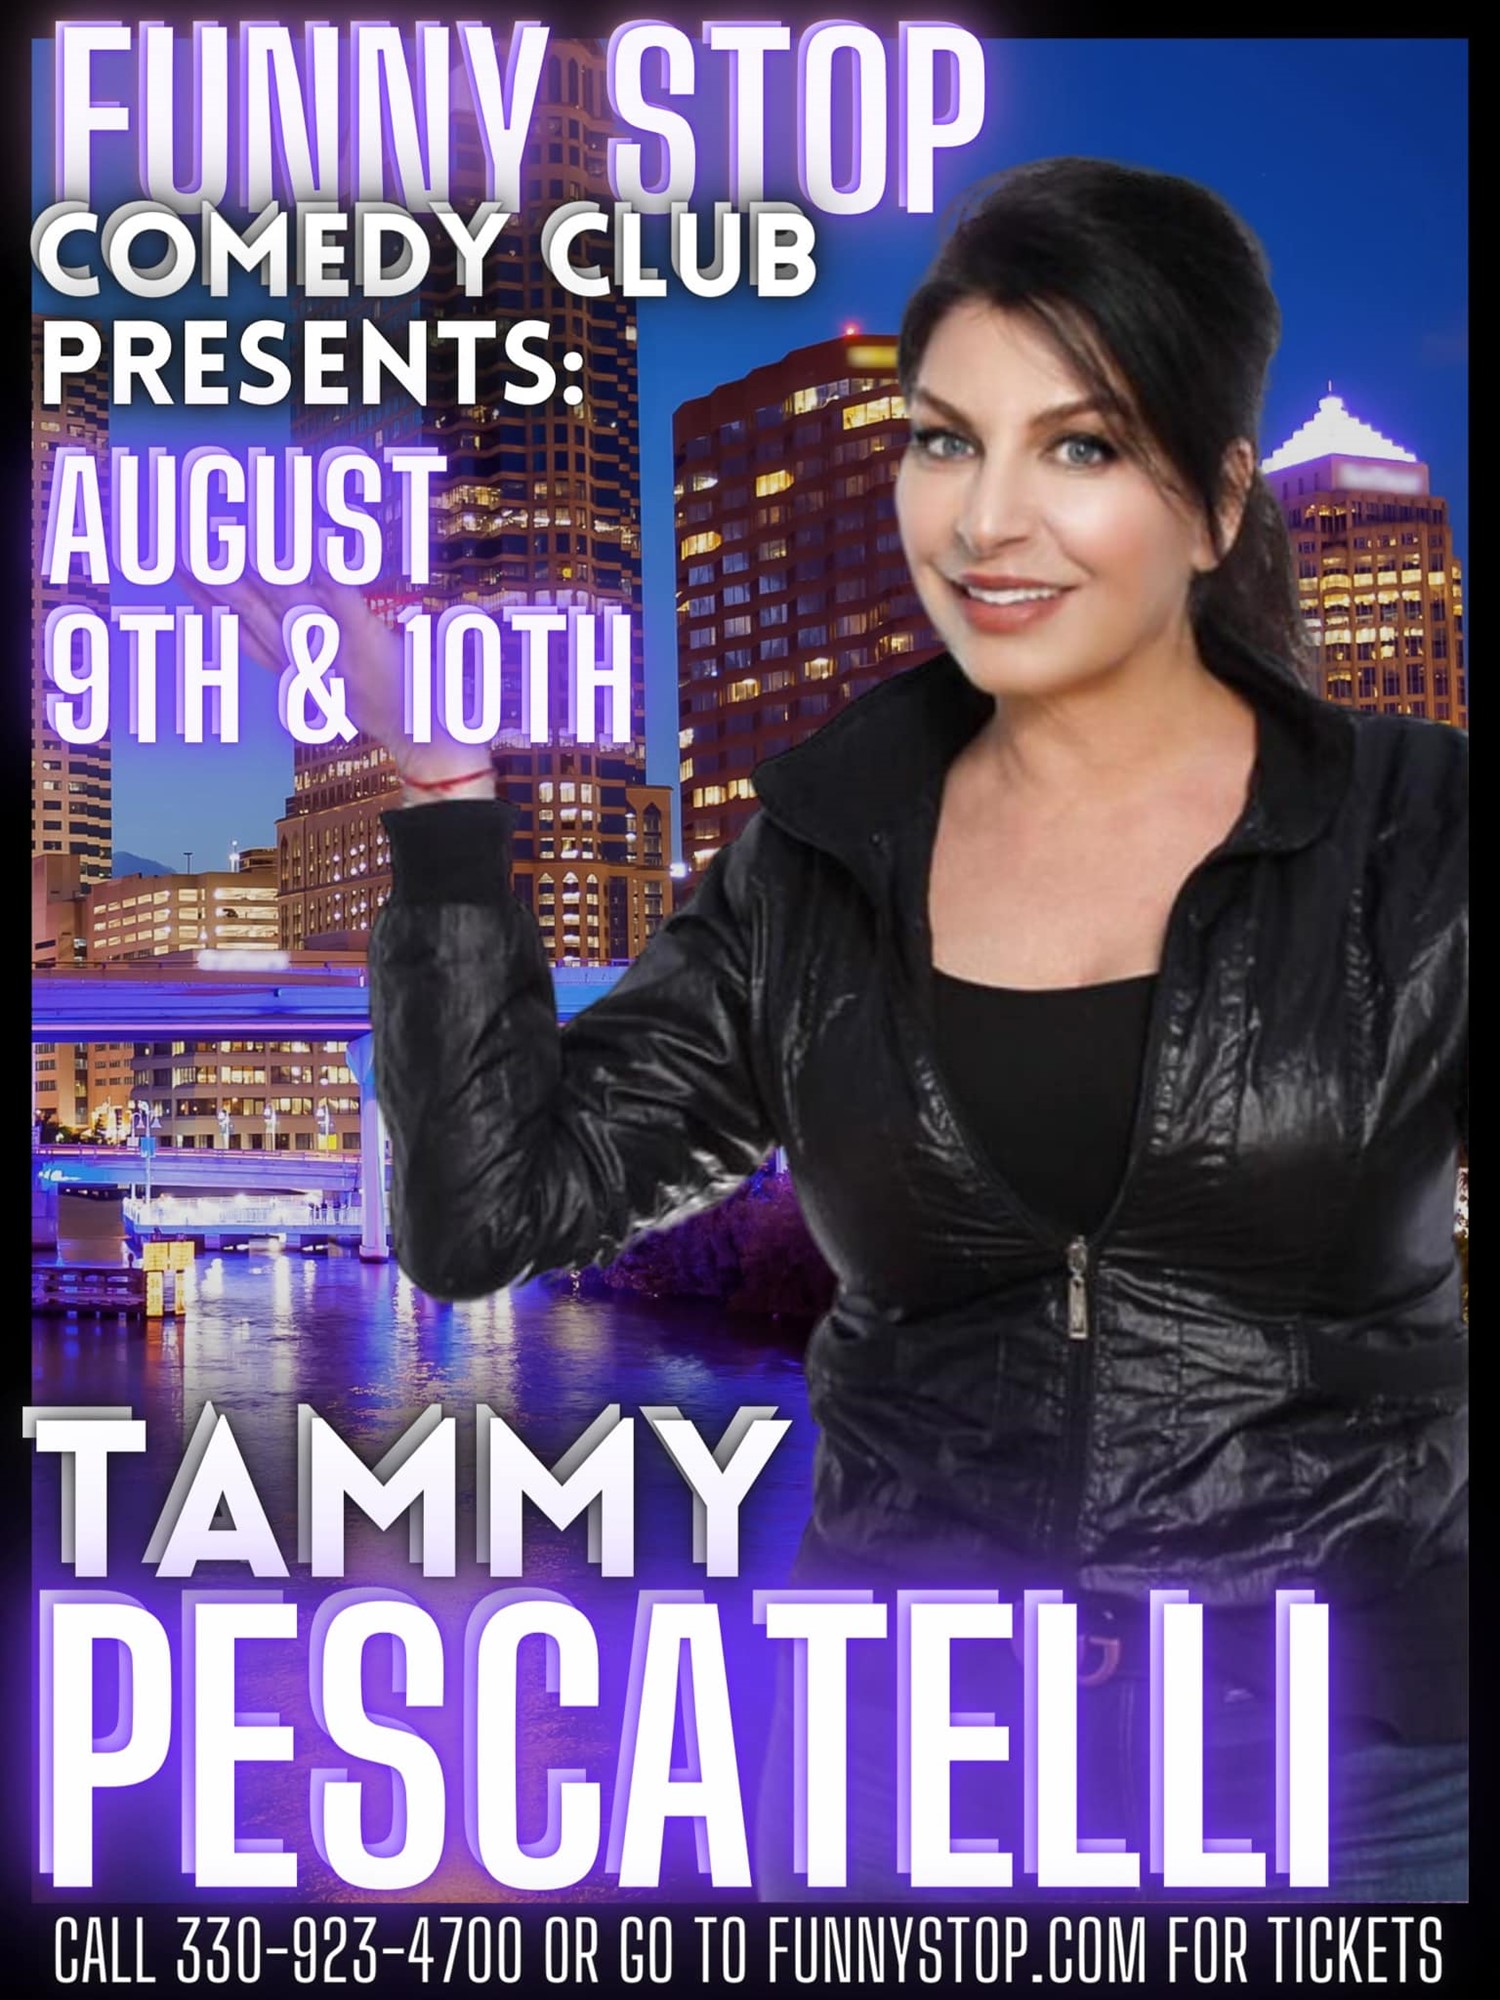 Tammy Pescatelli - Sat. 7:30 Show Funny Stop Comedy Club on Aug 10, 19:30@Funny Stop Comedy Club - Buy tickets and Get information on Funny Stop funnystop.online